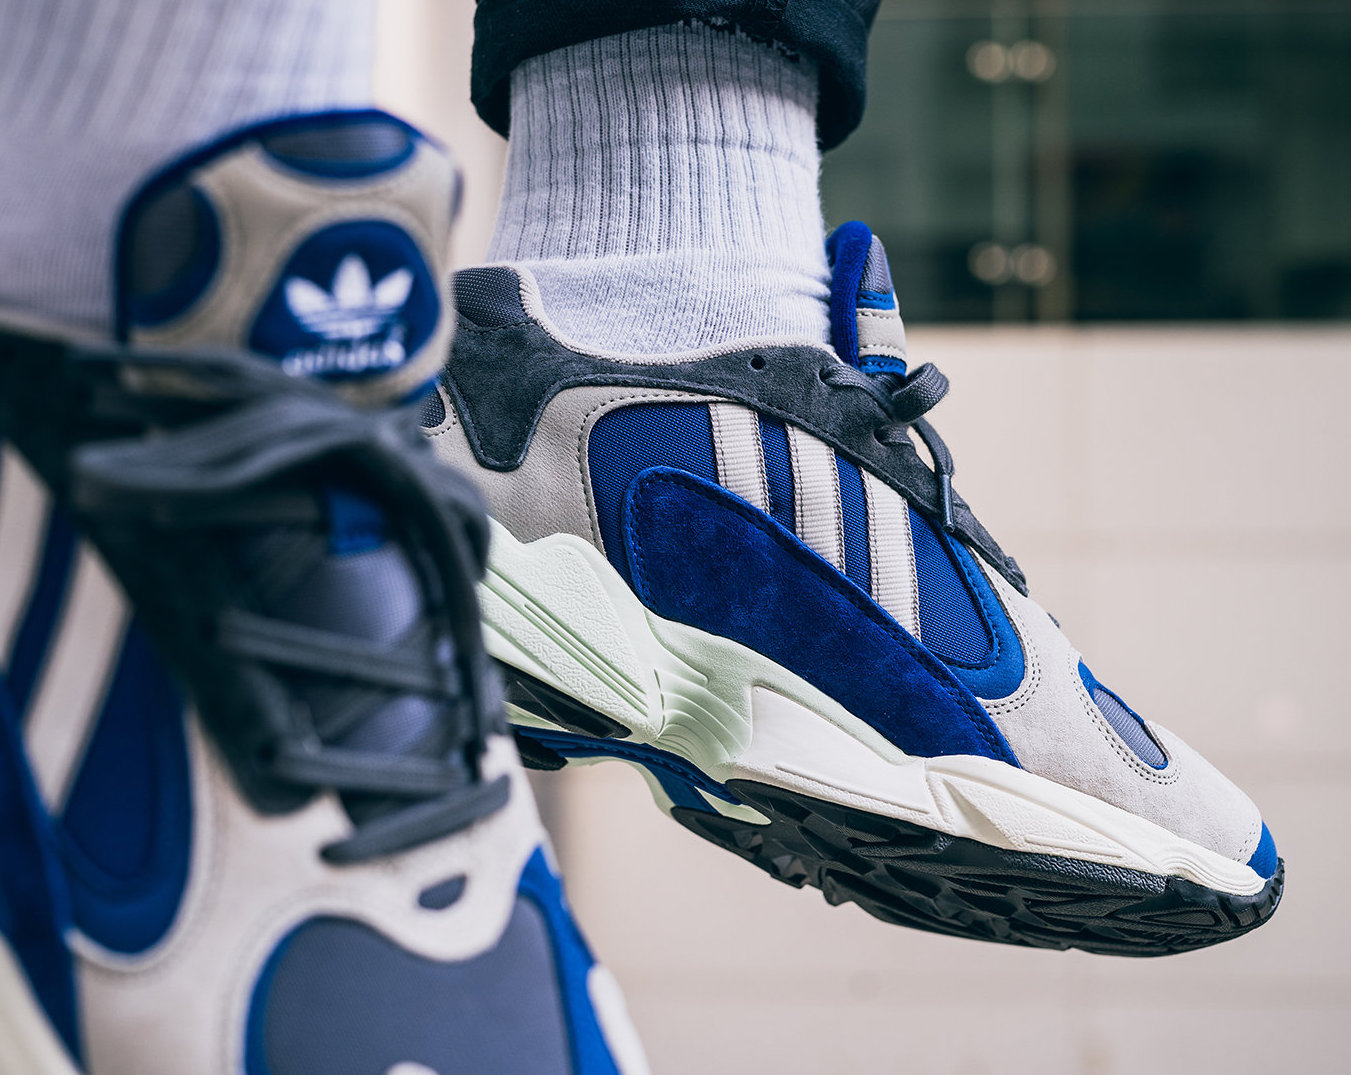 Now Available: adidas Yung-1 "Grey Navy" — Sneaker Shouts